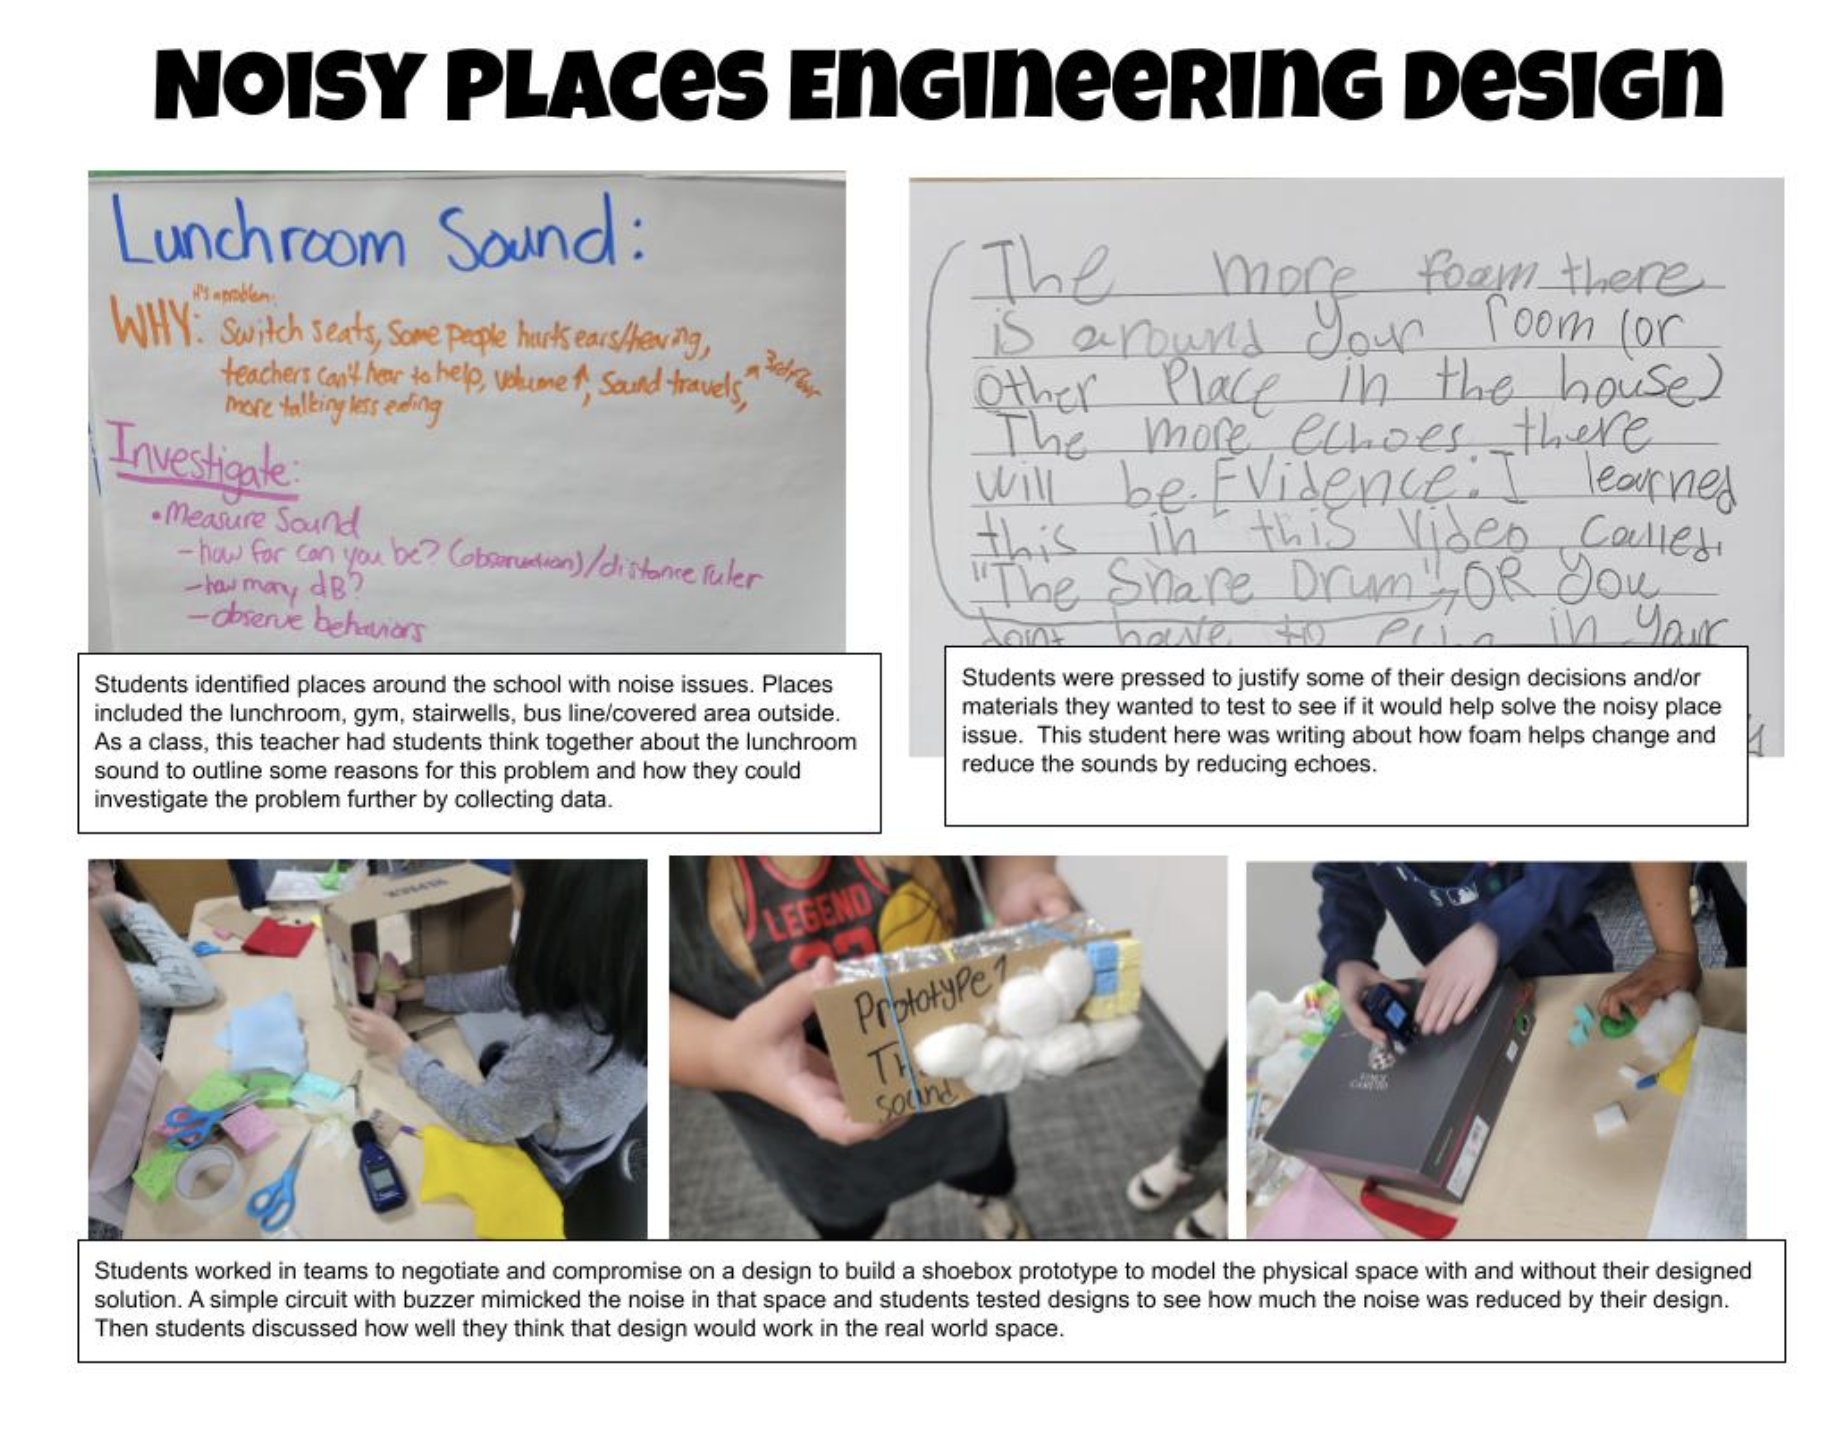 An example of a noisy places engineering design. First students identified places around the school with noise issues. Places included the gym, stairwells. bus line/covered area outside. As a class, this teacher had students think together about the lunchroom sound to outline some reasons for this problem and how they could investigate the problem further by collecting data. Next students were pressed to justify some of their design decisions and/or materials they wanted to test to see if it would help solve the noisy place issue. This student here was writing about how foam helps change and reduce the sounds by reducing echoes. Third, students worked in teams to negotiate and compromise on a design to build a shoebox prototype to model the physical space with and without their designed solution. A simple circuit with buzzer mimicked the noise in that space and students tested designs to see how much the noise was reduced by their design. Then students discussed how well they think that design would work in the real world space.